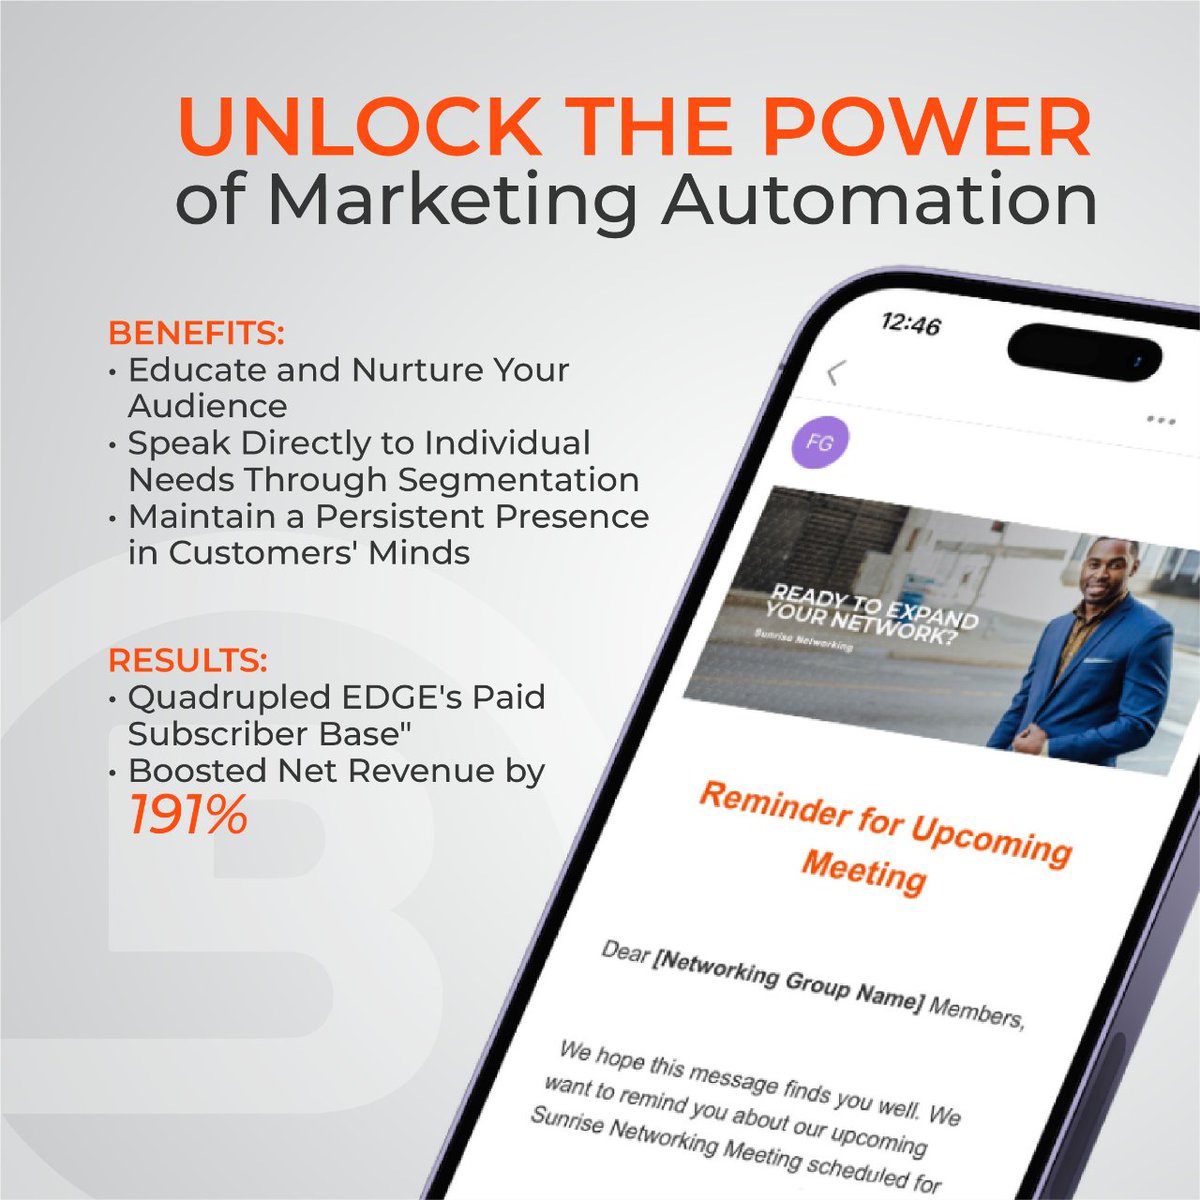 Quadruple subscribers, boost revenue by 191%—that's not just marketing; it's marketing automation as a masterpiece. 🎨📈 Want to unlock similar milestones? The key is right here. 👇 #CEOInsights #BusinessGrowth